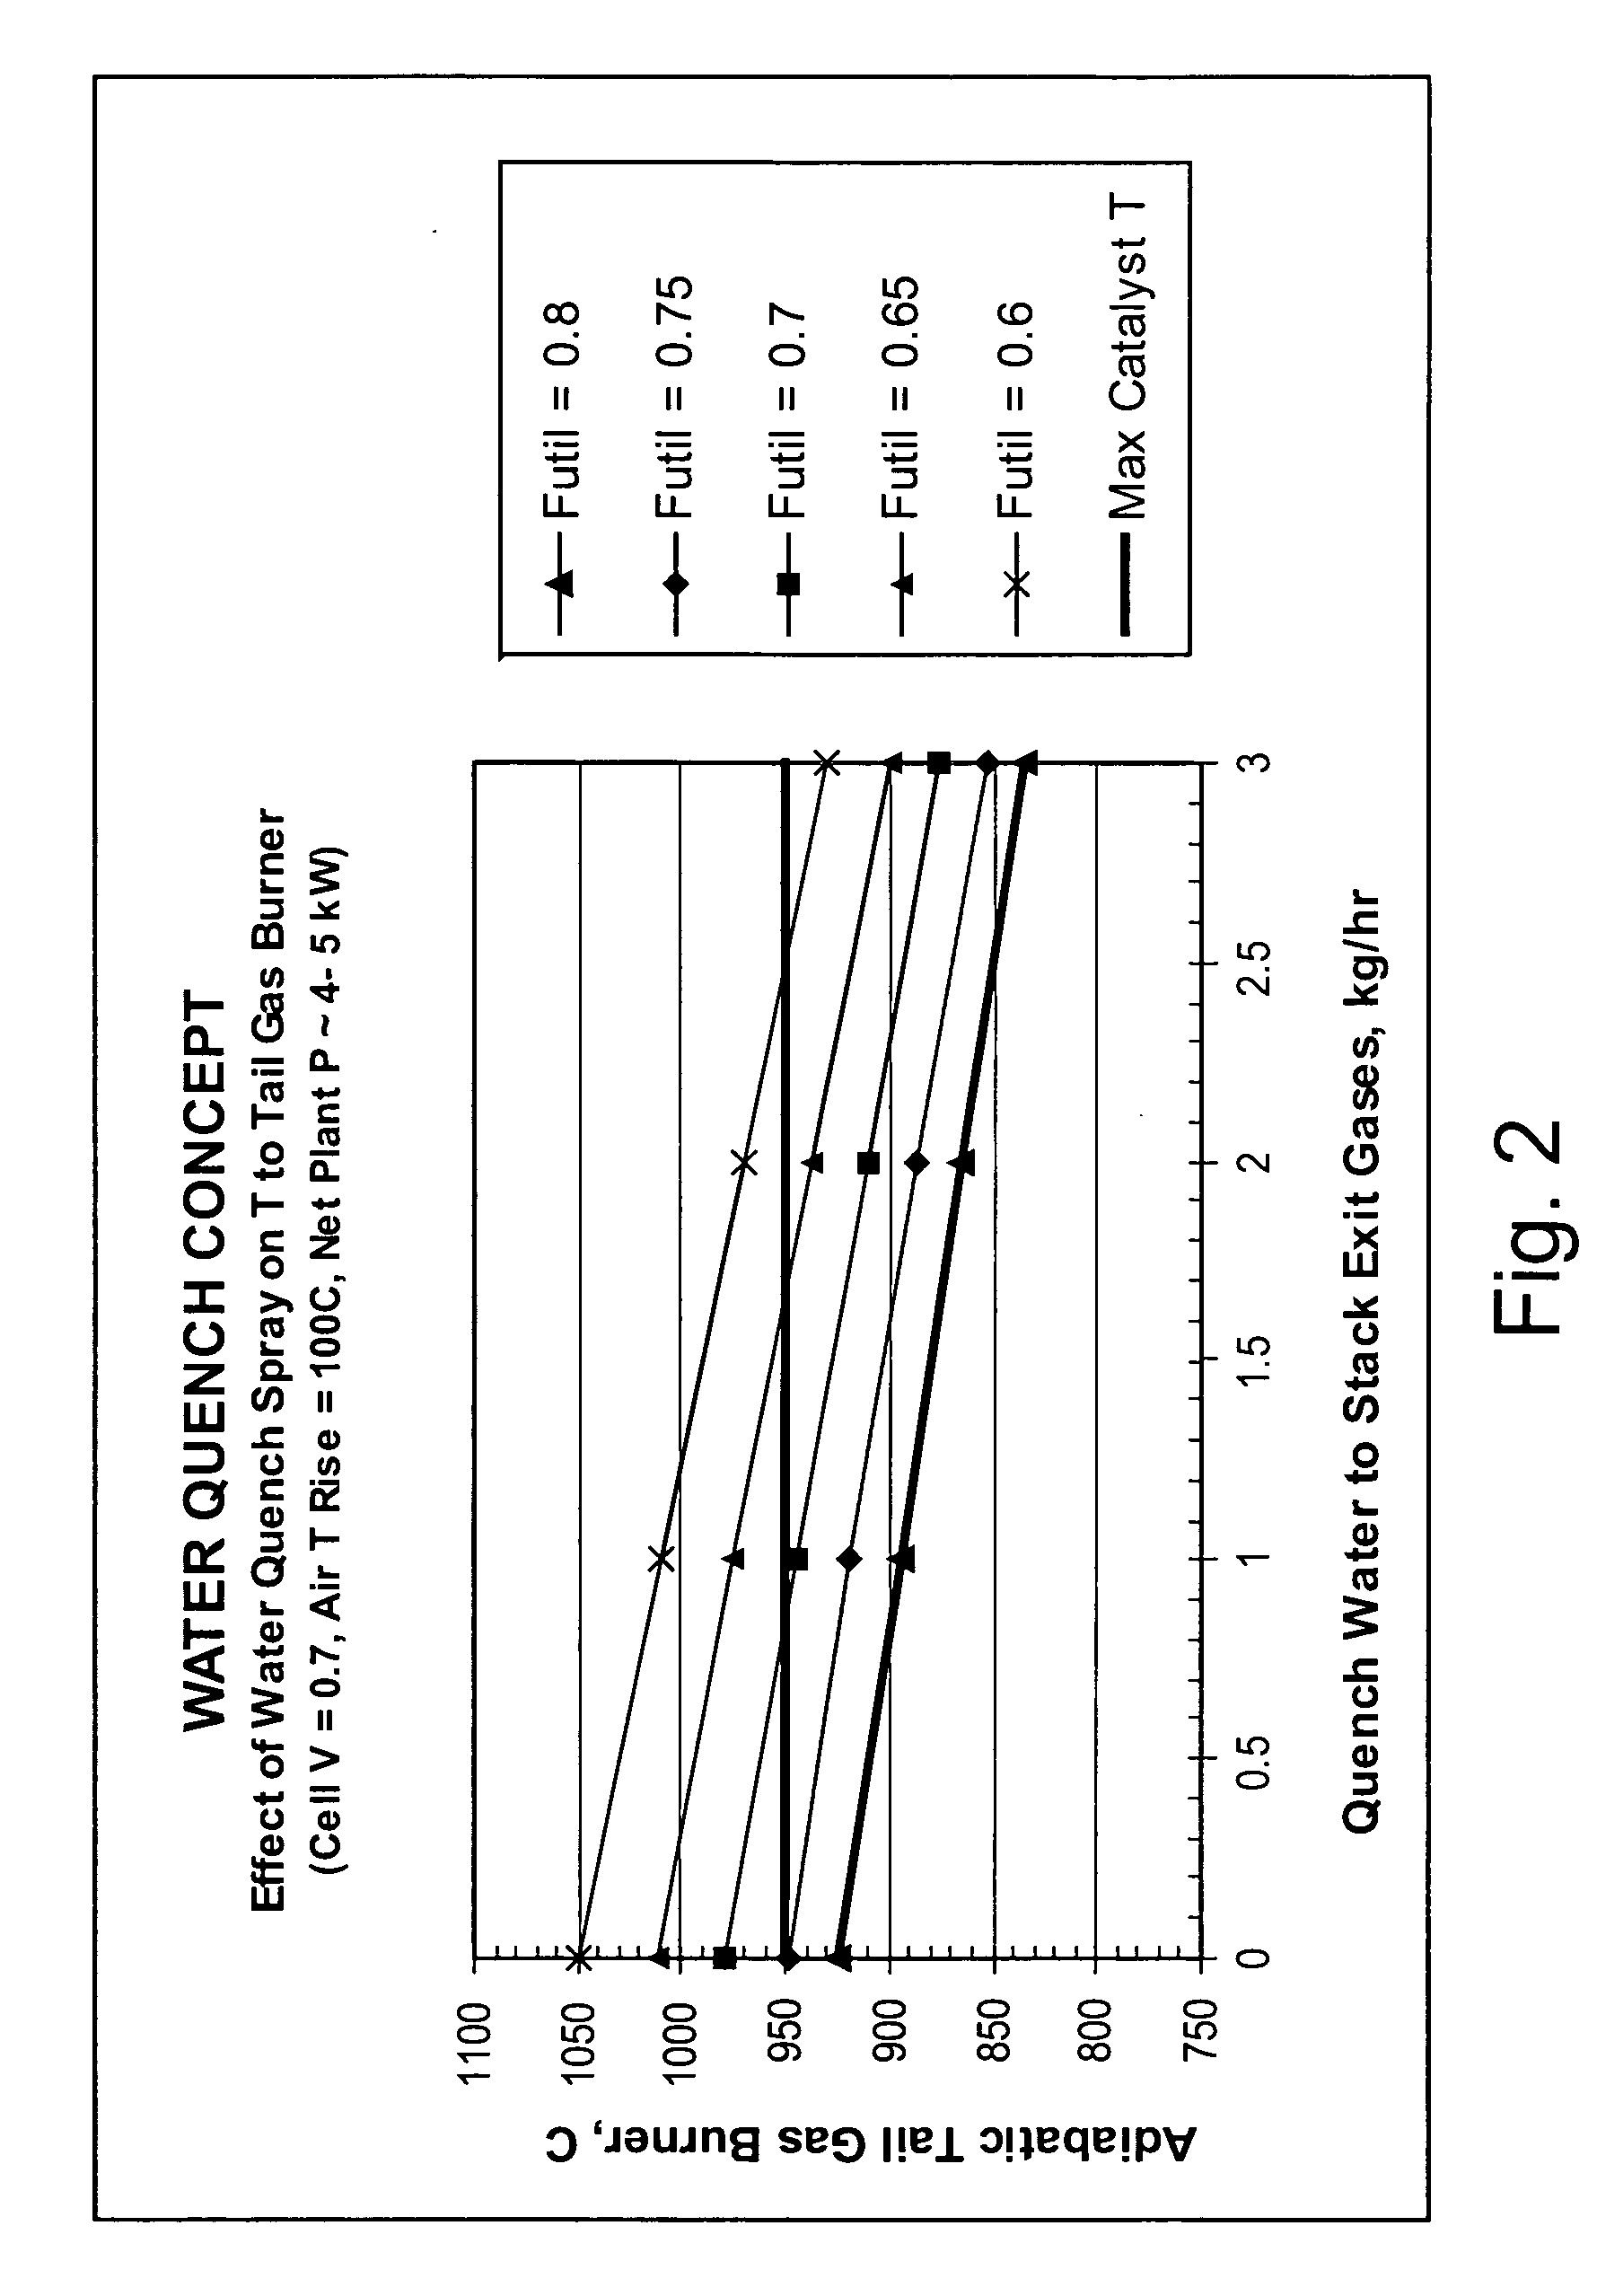 High temperature protection of fuel cell system combustor and other components via water or water or water vapor injection